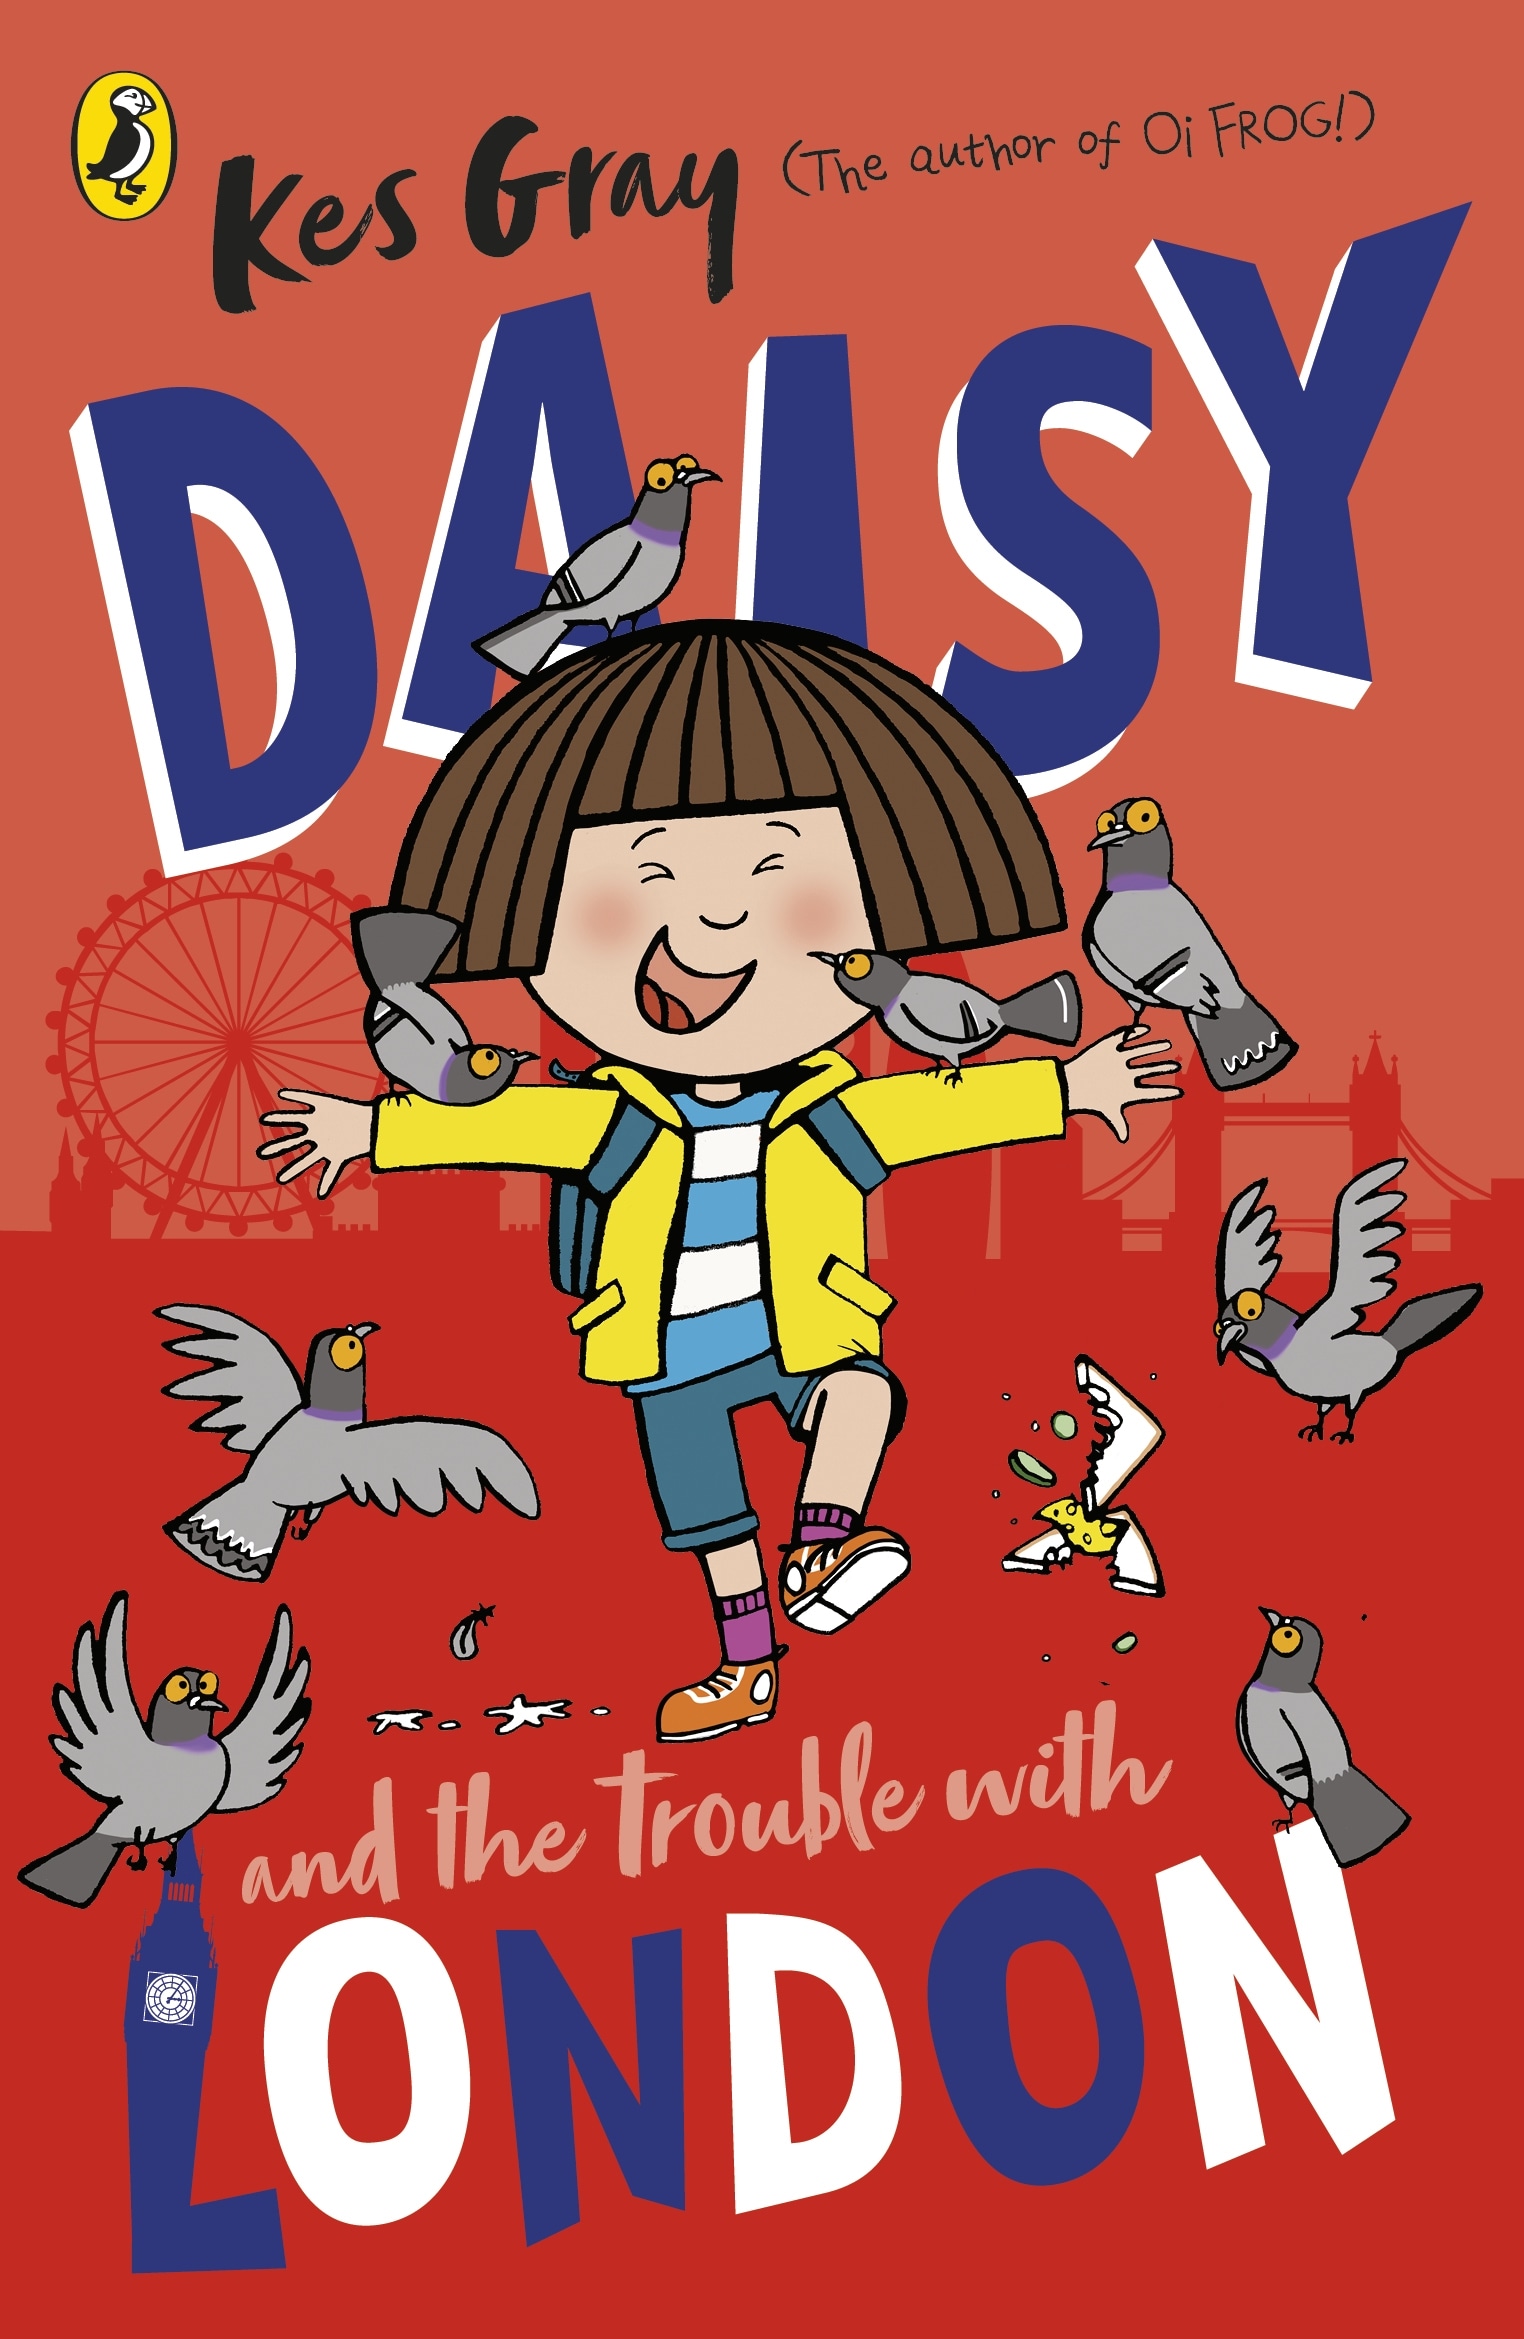 Book “Daisy and the Trouble With London” by Kes Gray — March 3, 2022